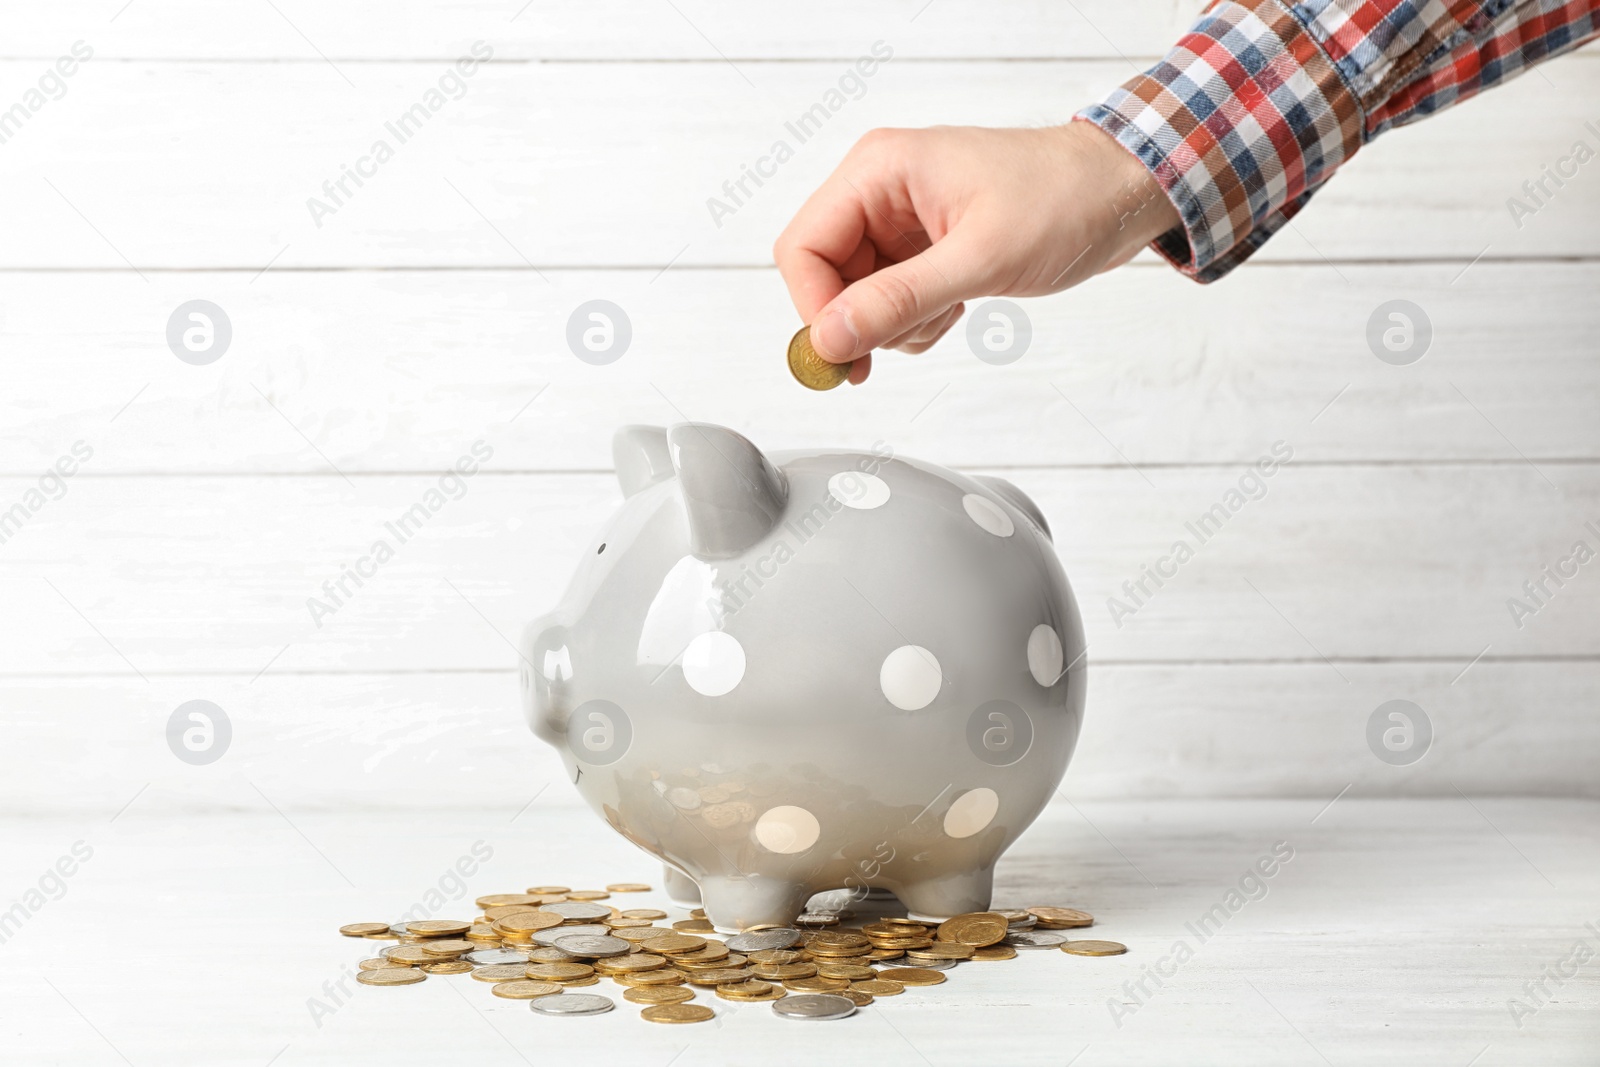 Photo of Man putting coin into piggy bank on table